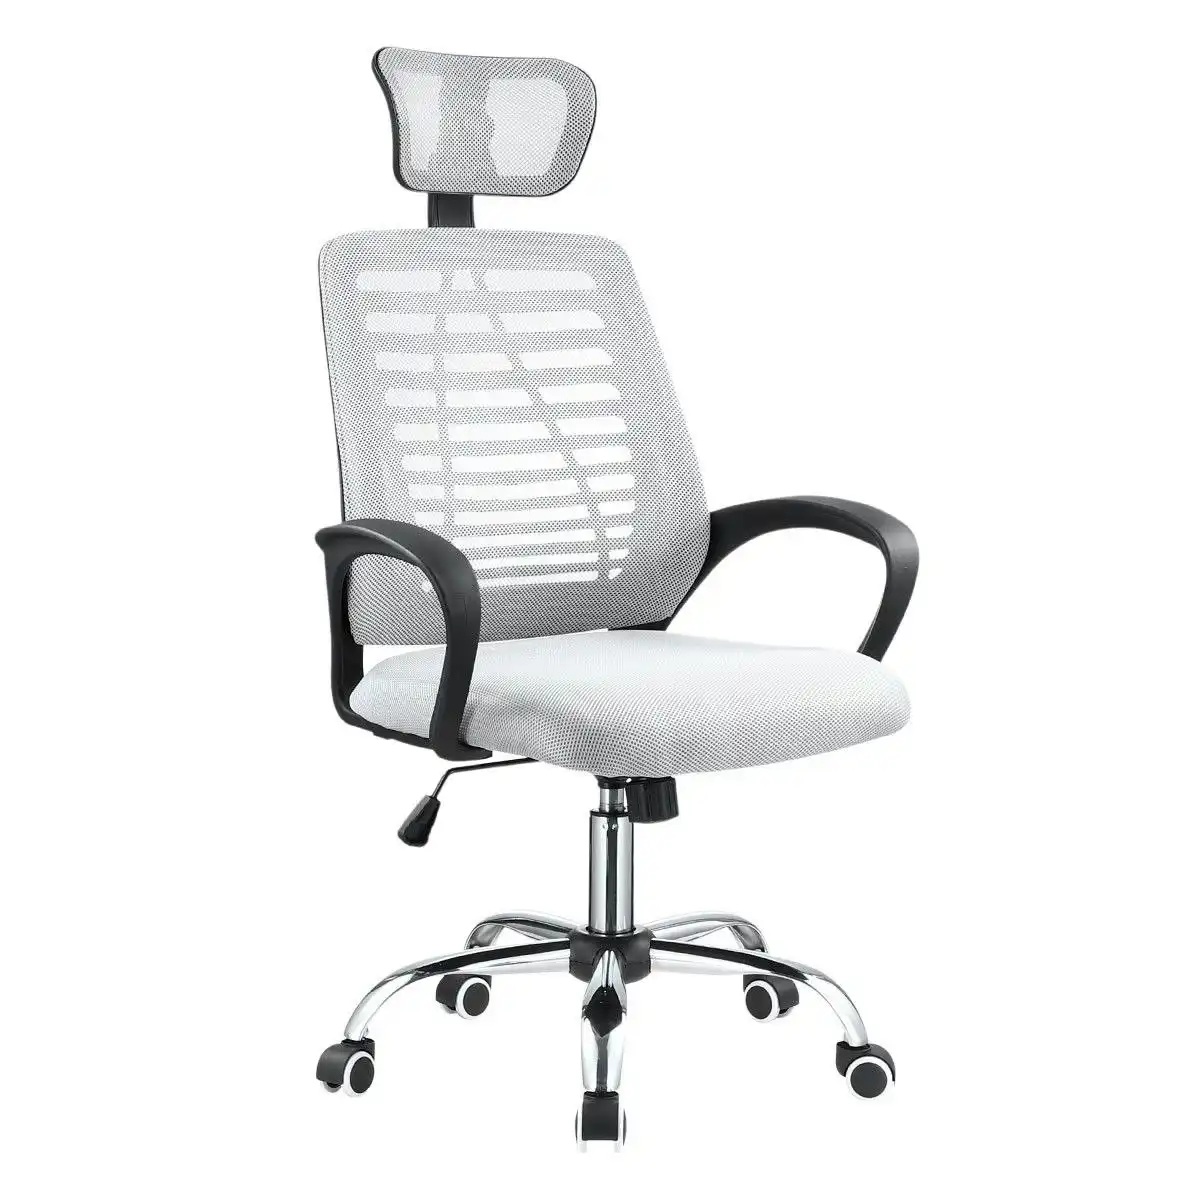 Ausway Executive Mesh Back Office Chair Computer Chair w/ Breathable Cushion and Armchairs